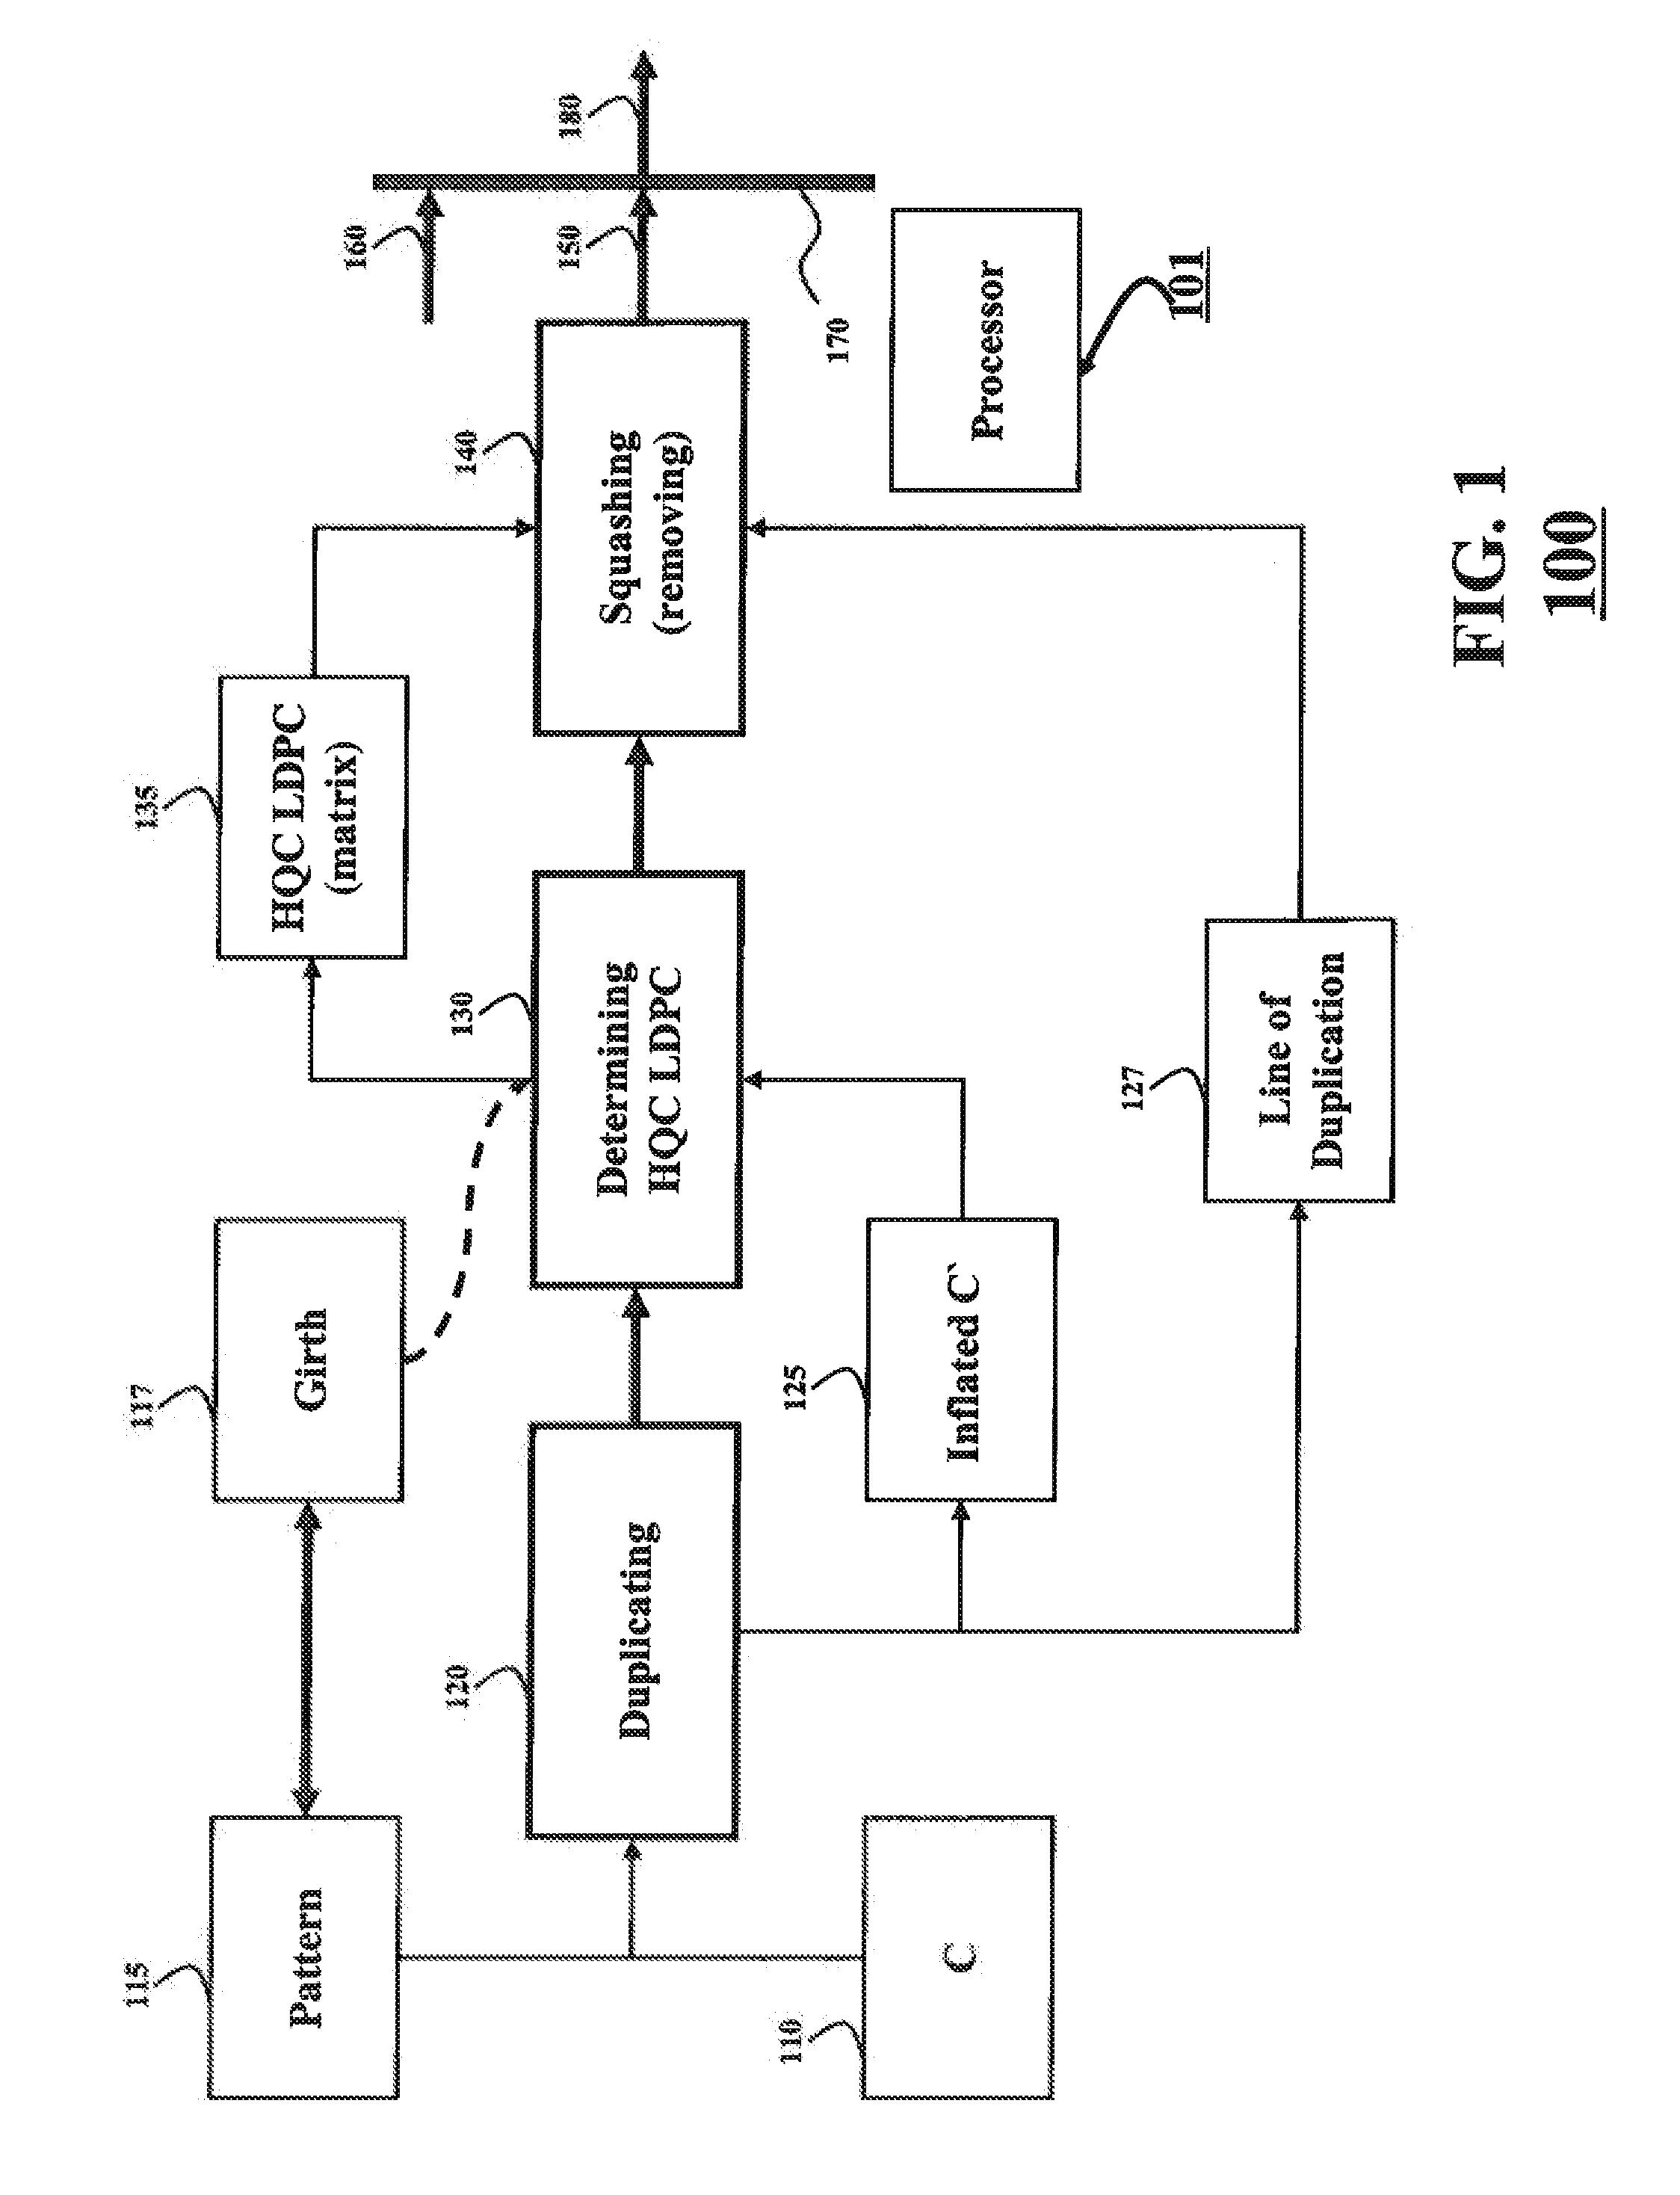 System and Method for Determining Quasi-Cyclic Low-Density Parity-Check Codes Having High Girth